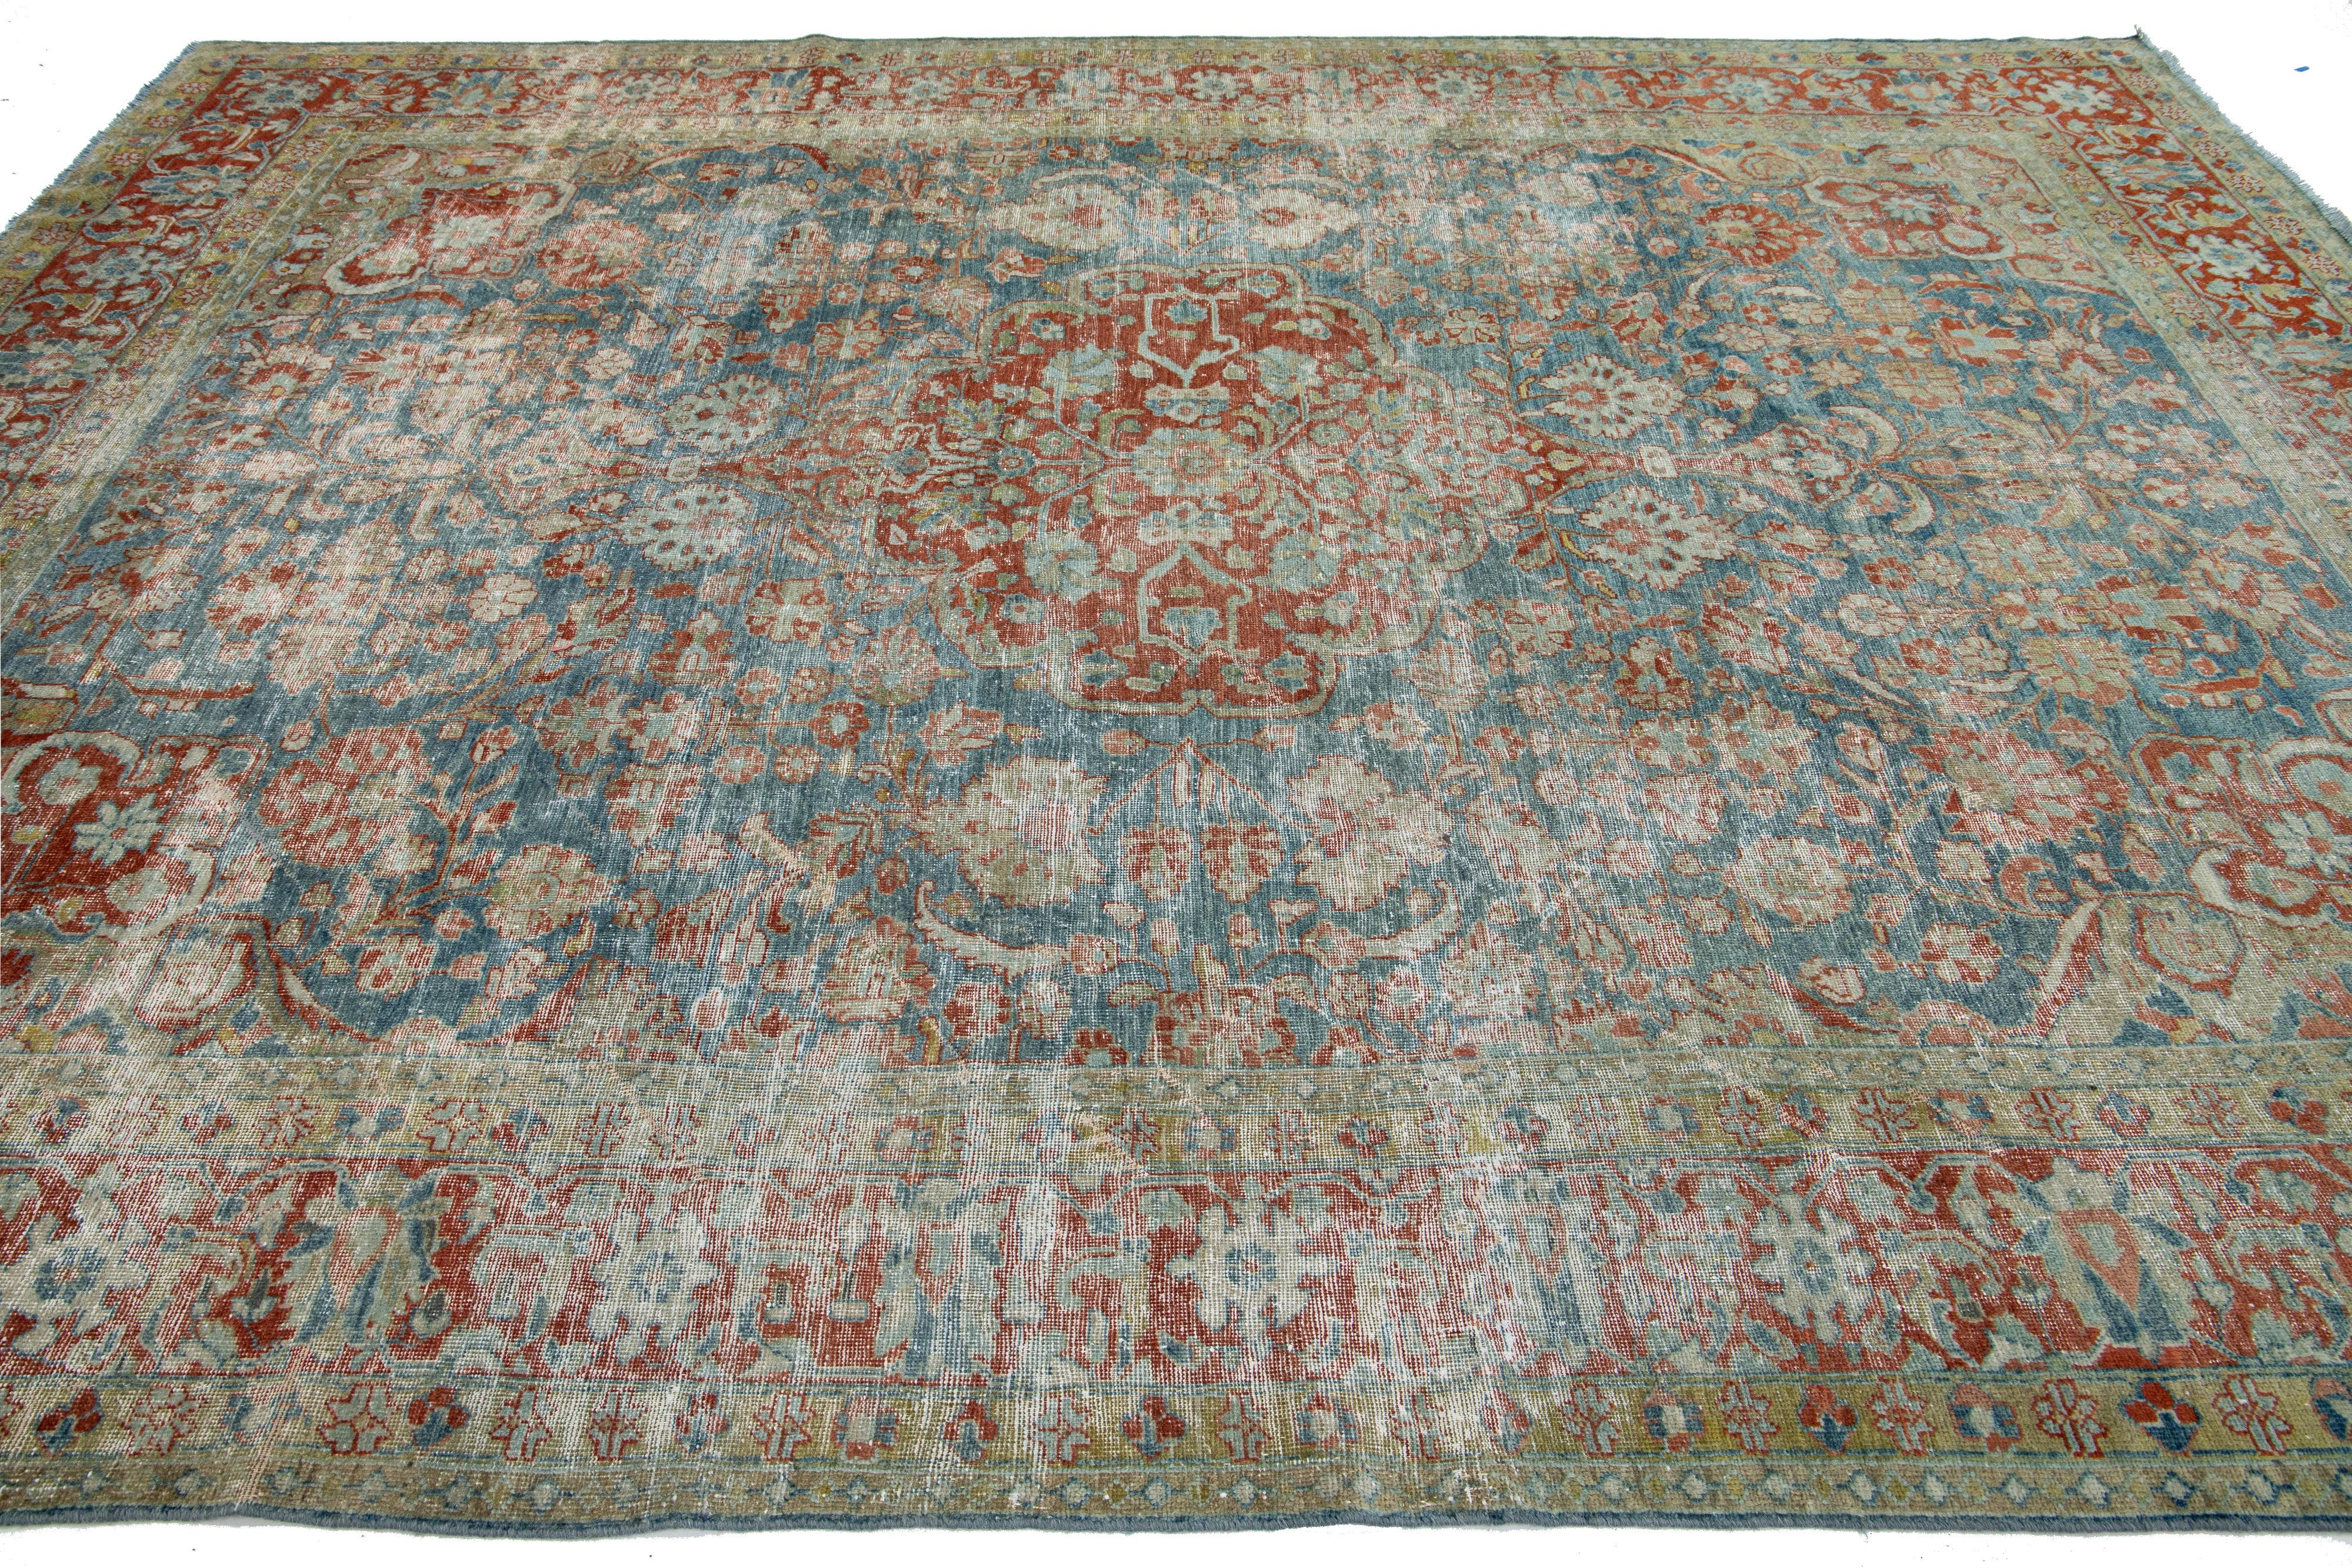 20th Century Handmade Persian Wool Rug In Blue with Medallion Design For Sale